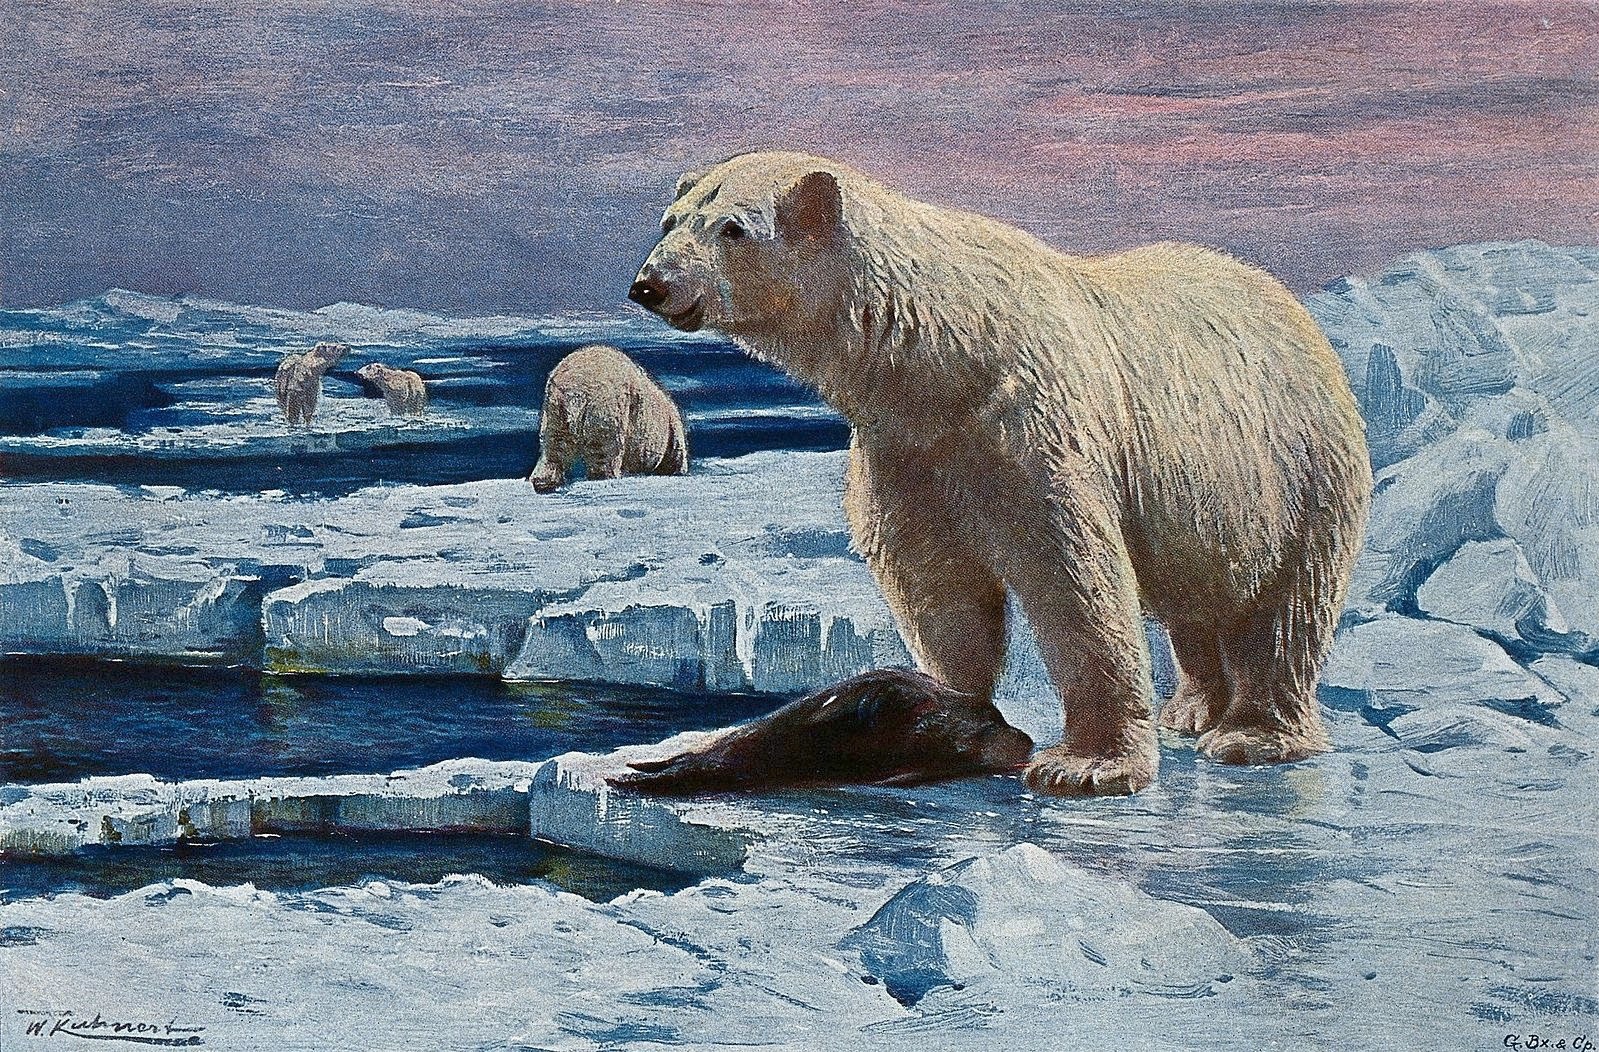 Sea ice, where seals rest and bask and where polar bears prey on them, has been important to the survival of both species. But with warming temperatures sea ice is winnowing and the Inuit in northern Canada are literally watching the world they know melting away with climate change. Painting by the great Wilhelm Kuhnert 